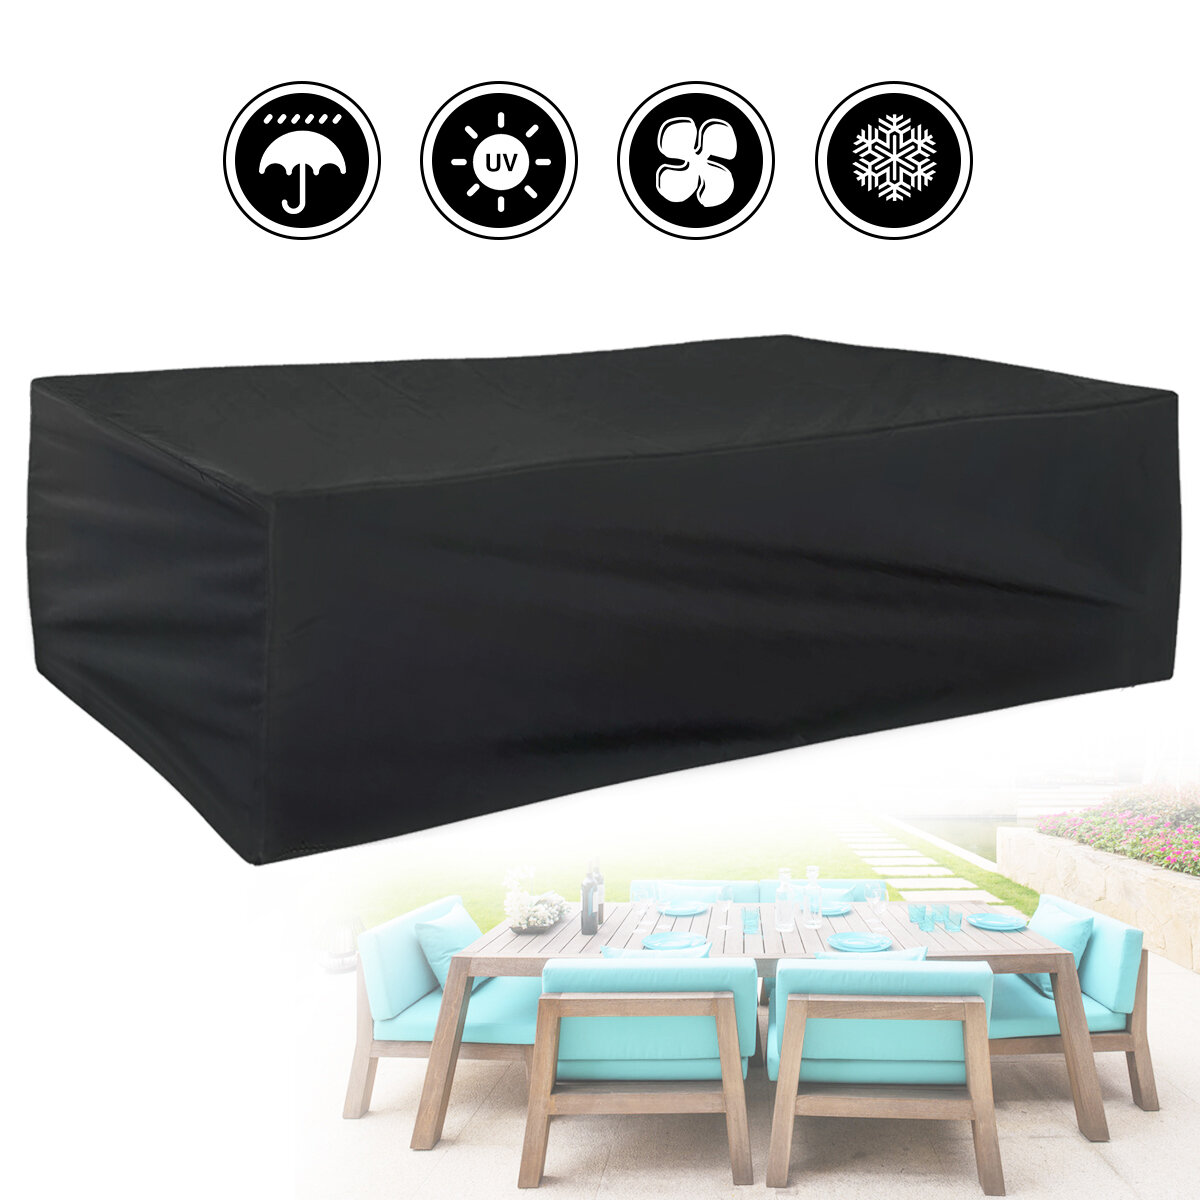 Gemitto 420d Patio Furniture Cover, Outdoor Patio Furniture Cover Waterproof